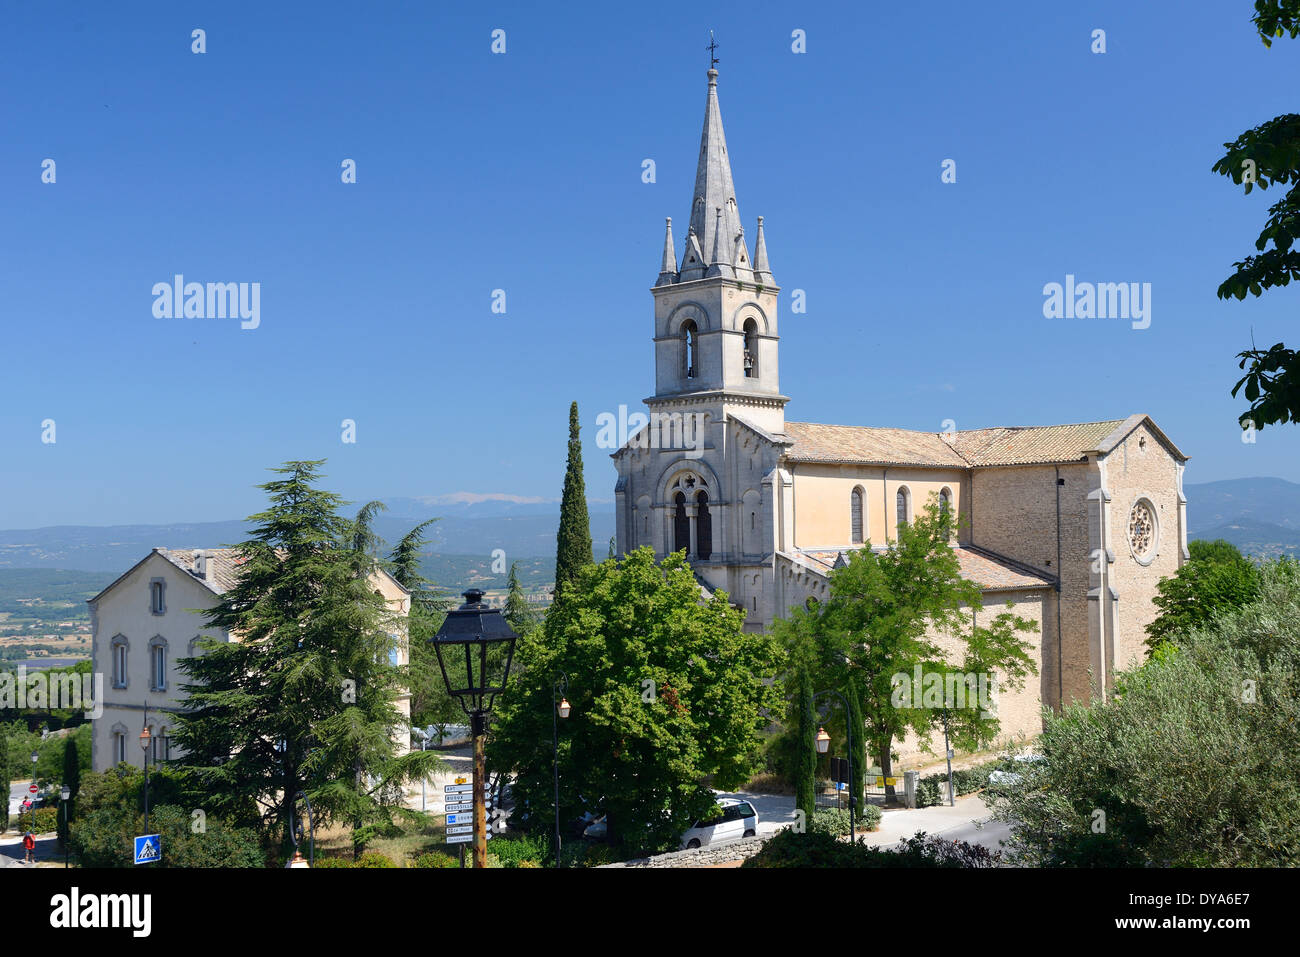 Europe, France, Provence, Vaucluse, Goult, church, building Stock Photo